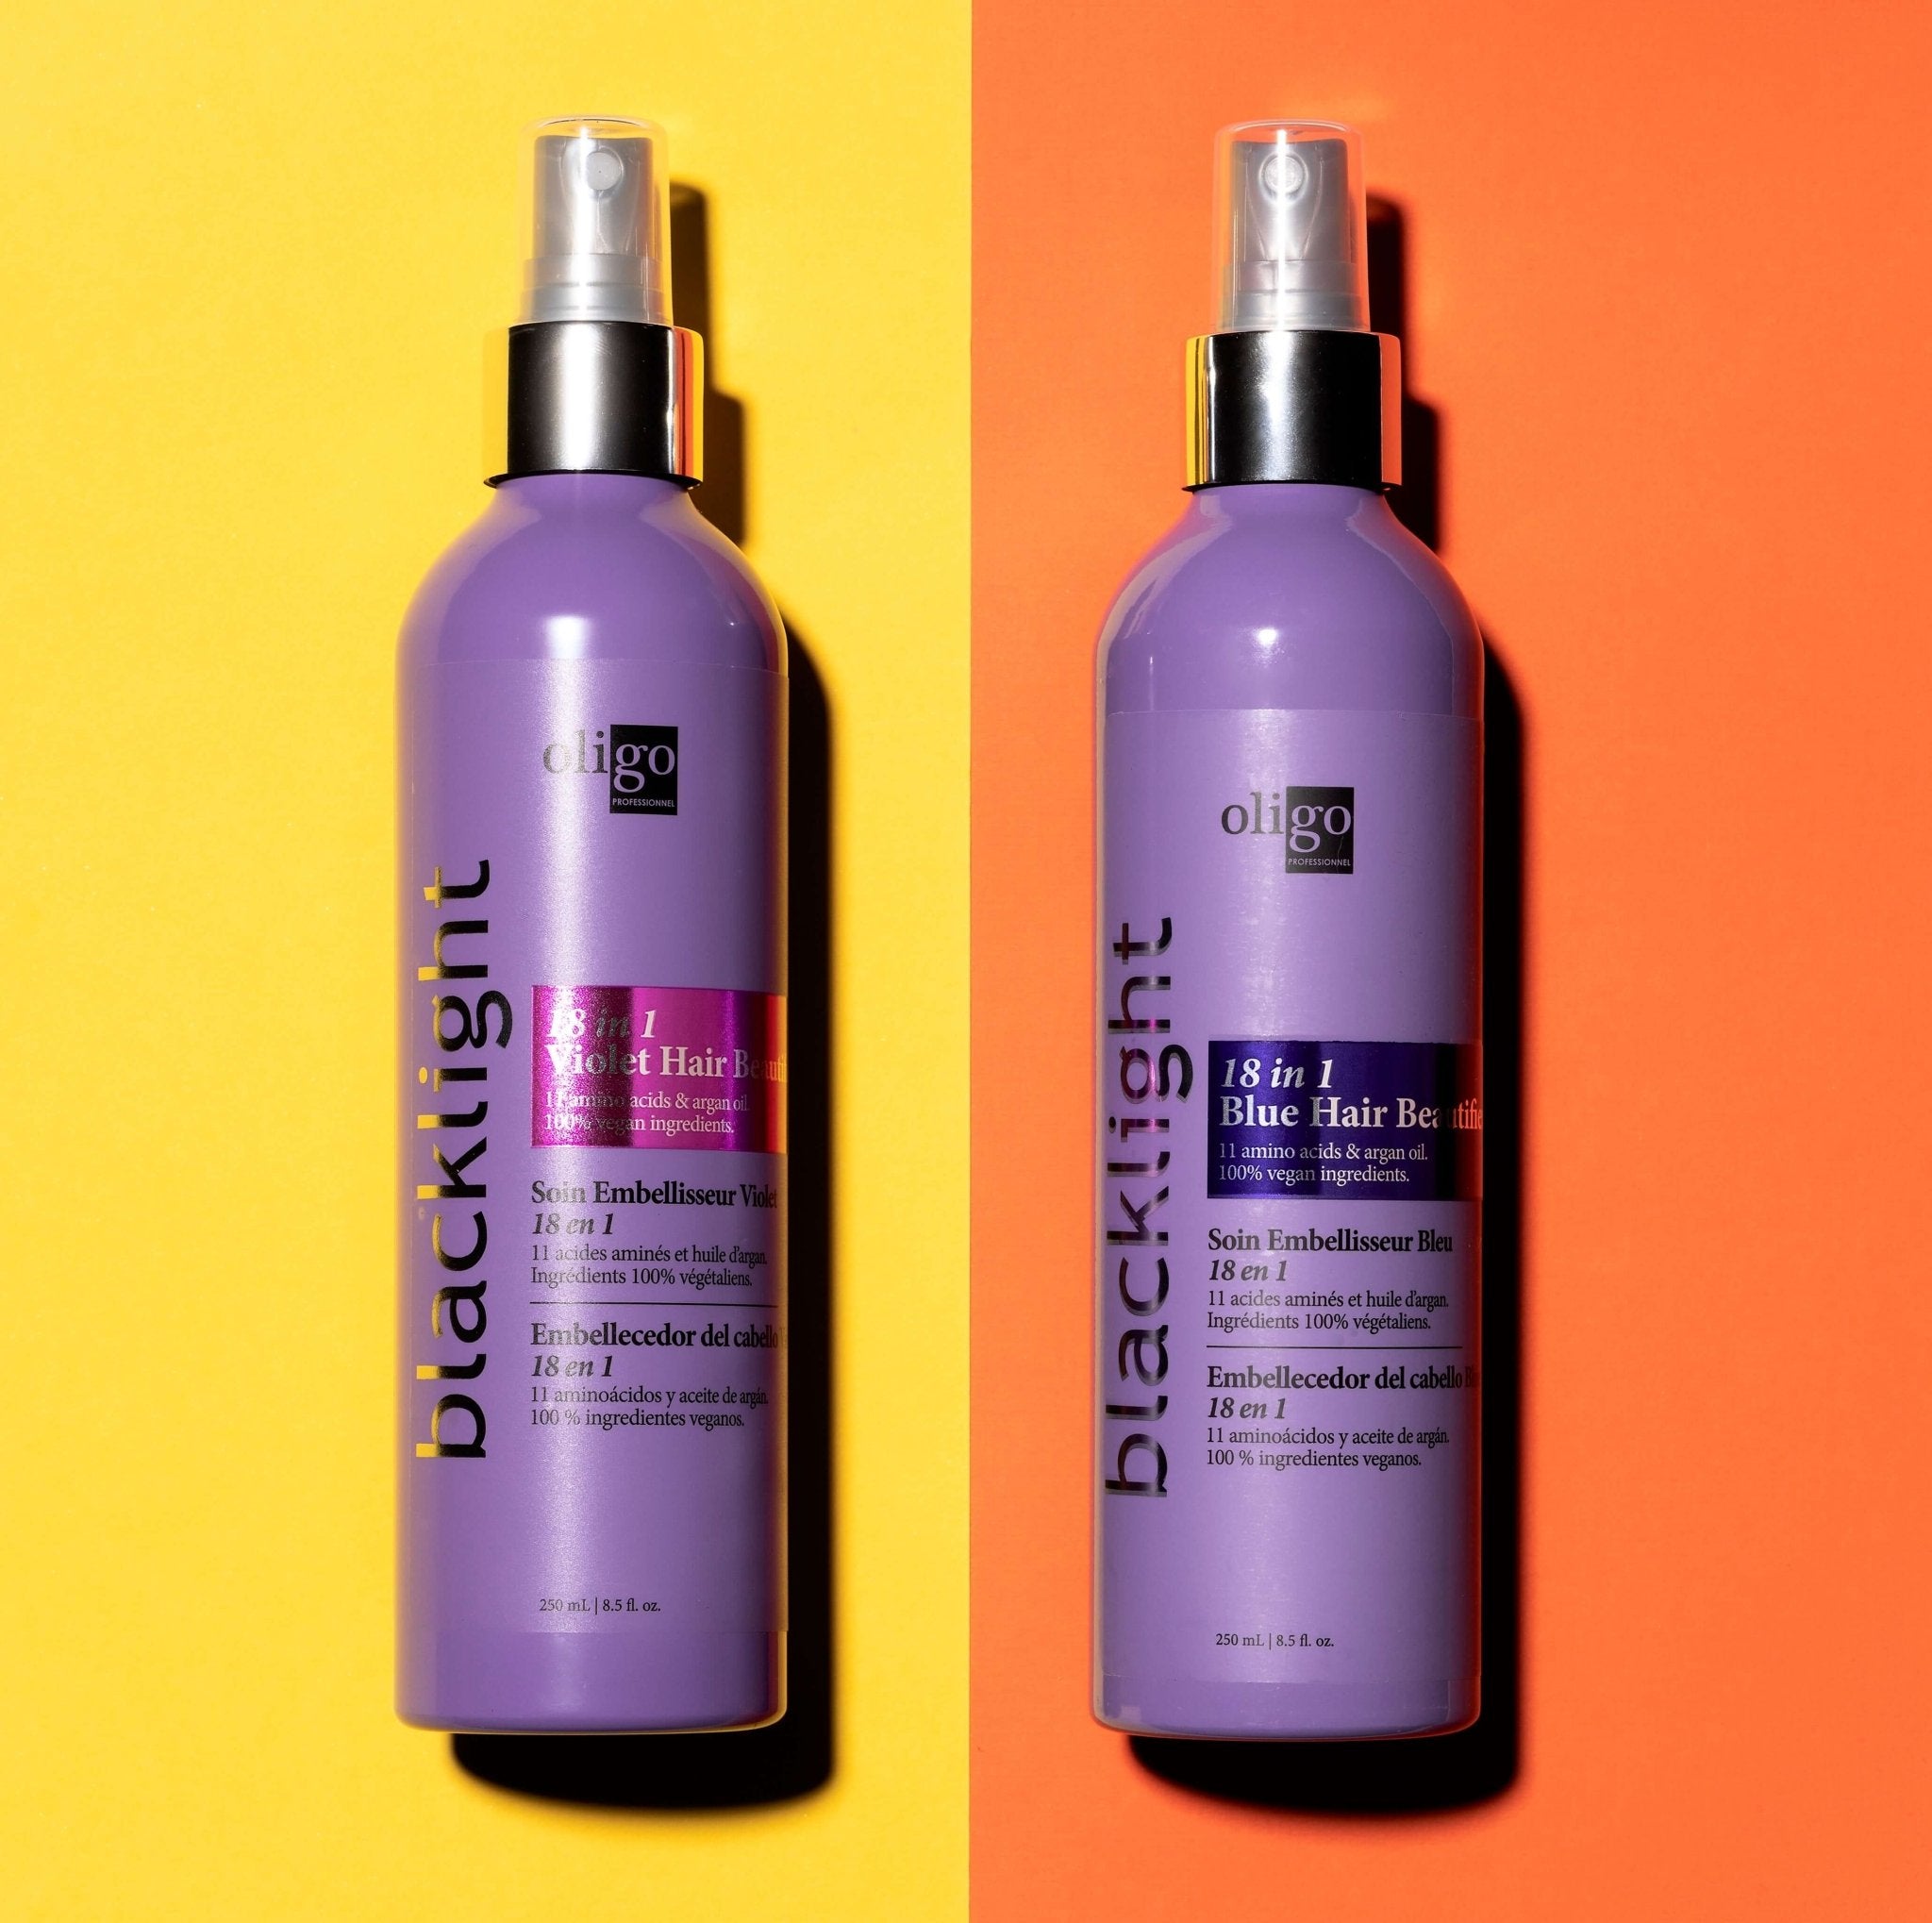 oligo blacklight 18 in 1 blue and violet toning leave in treatments on a orange and yellow background